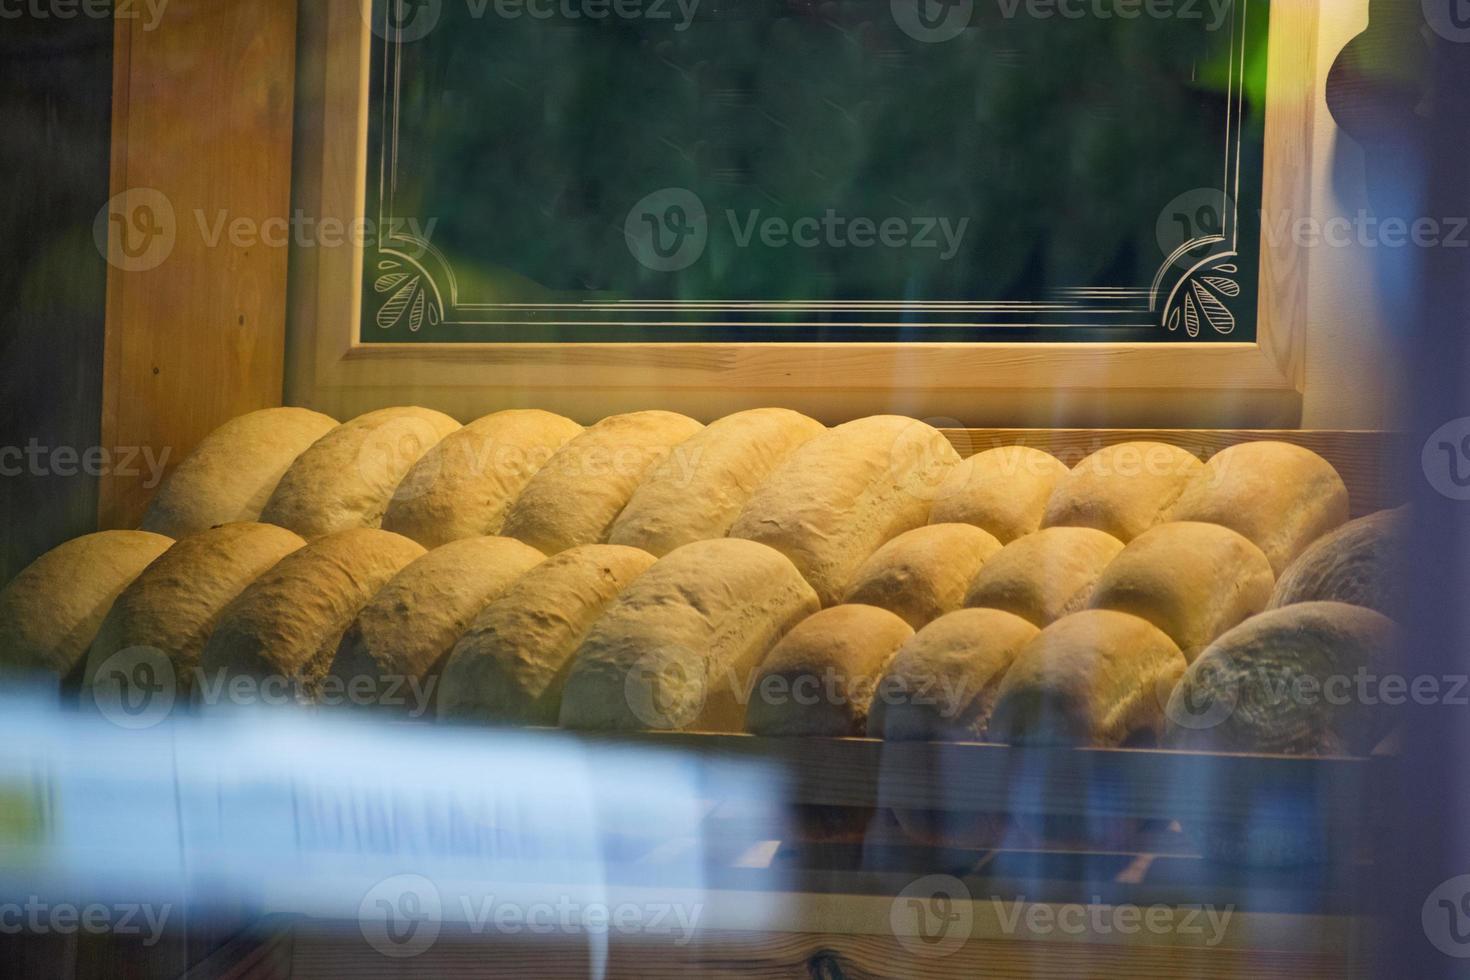 Baked bread in a bakery window display. Baked bread closeup in a typical confectionery shop photo